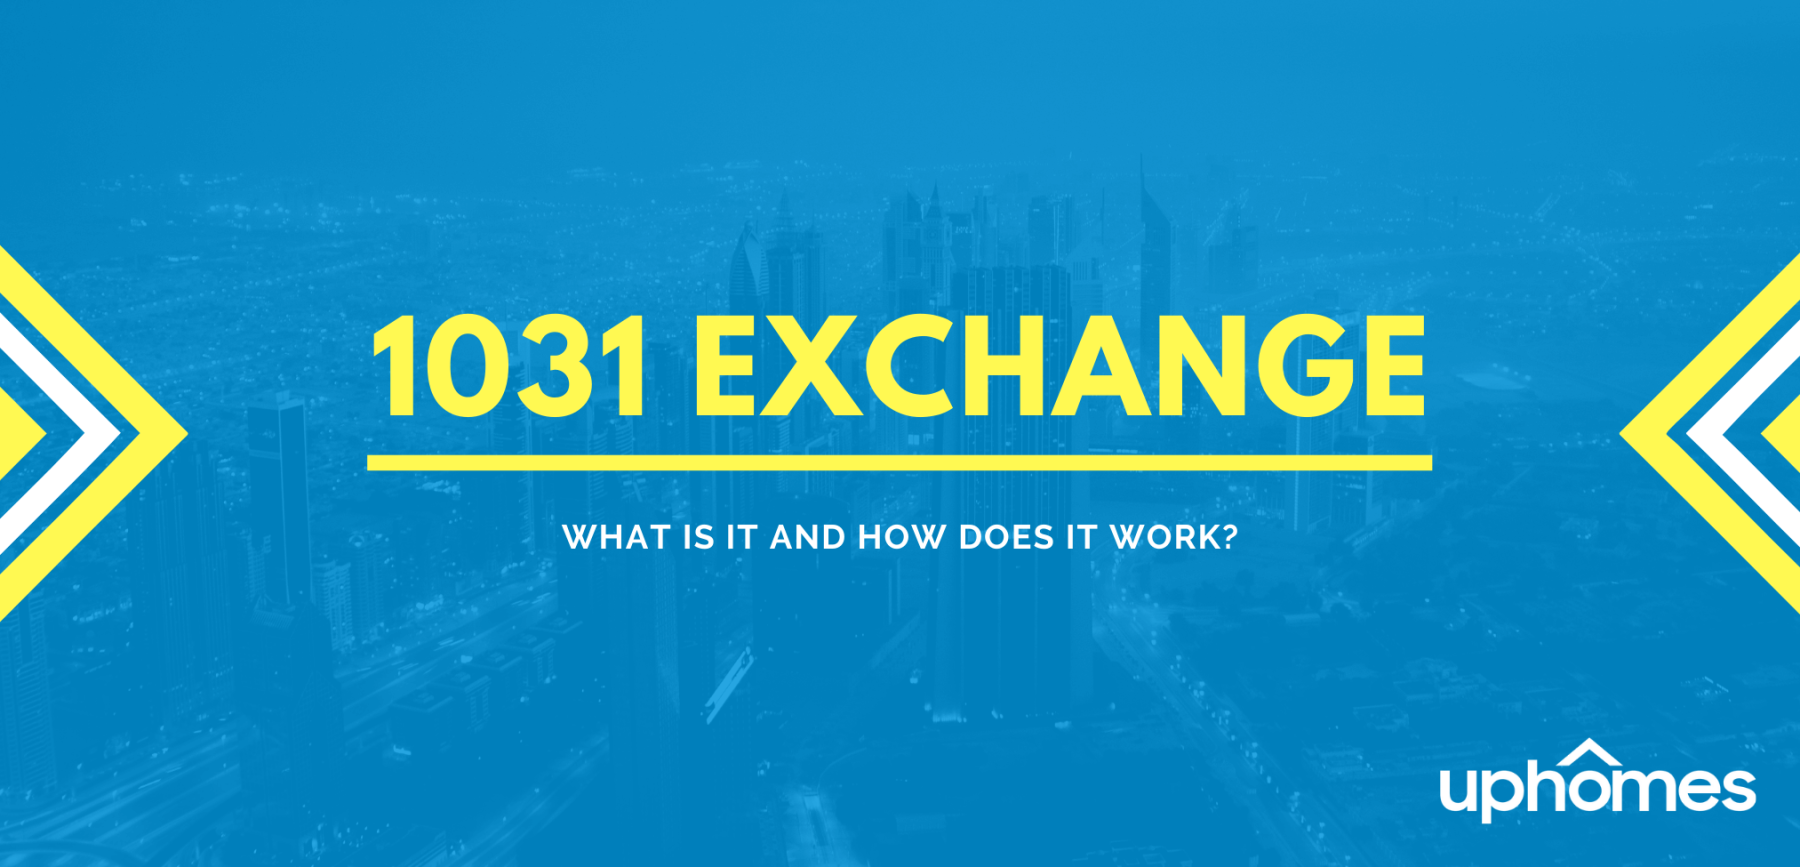 7 Takeaways: What is a 1031 Exchange?